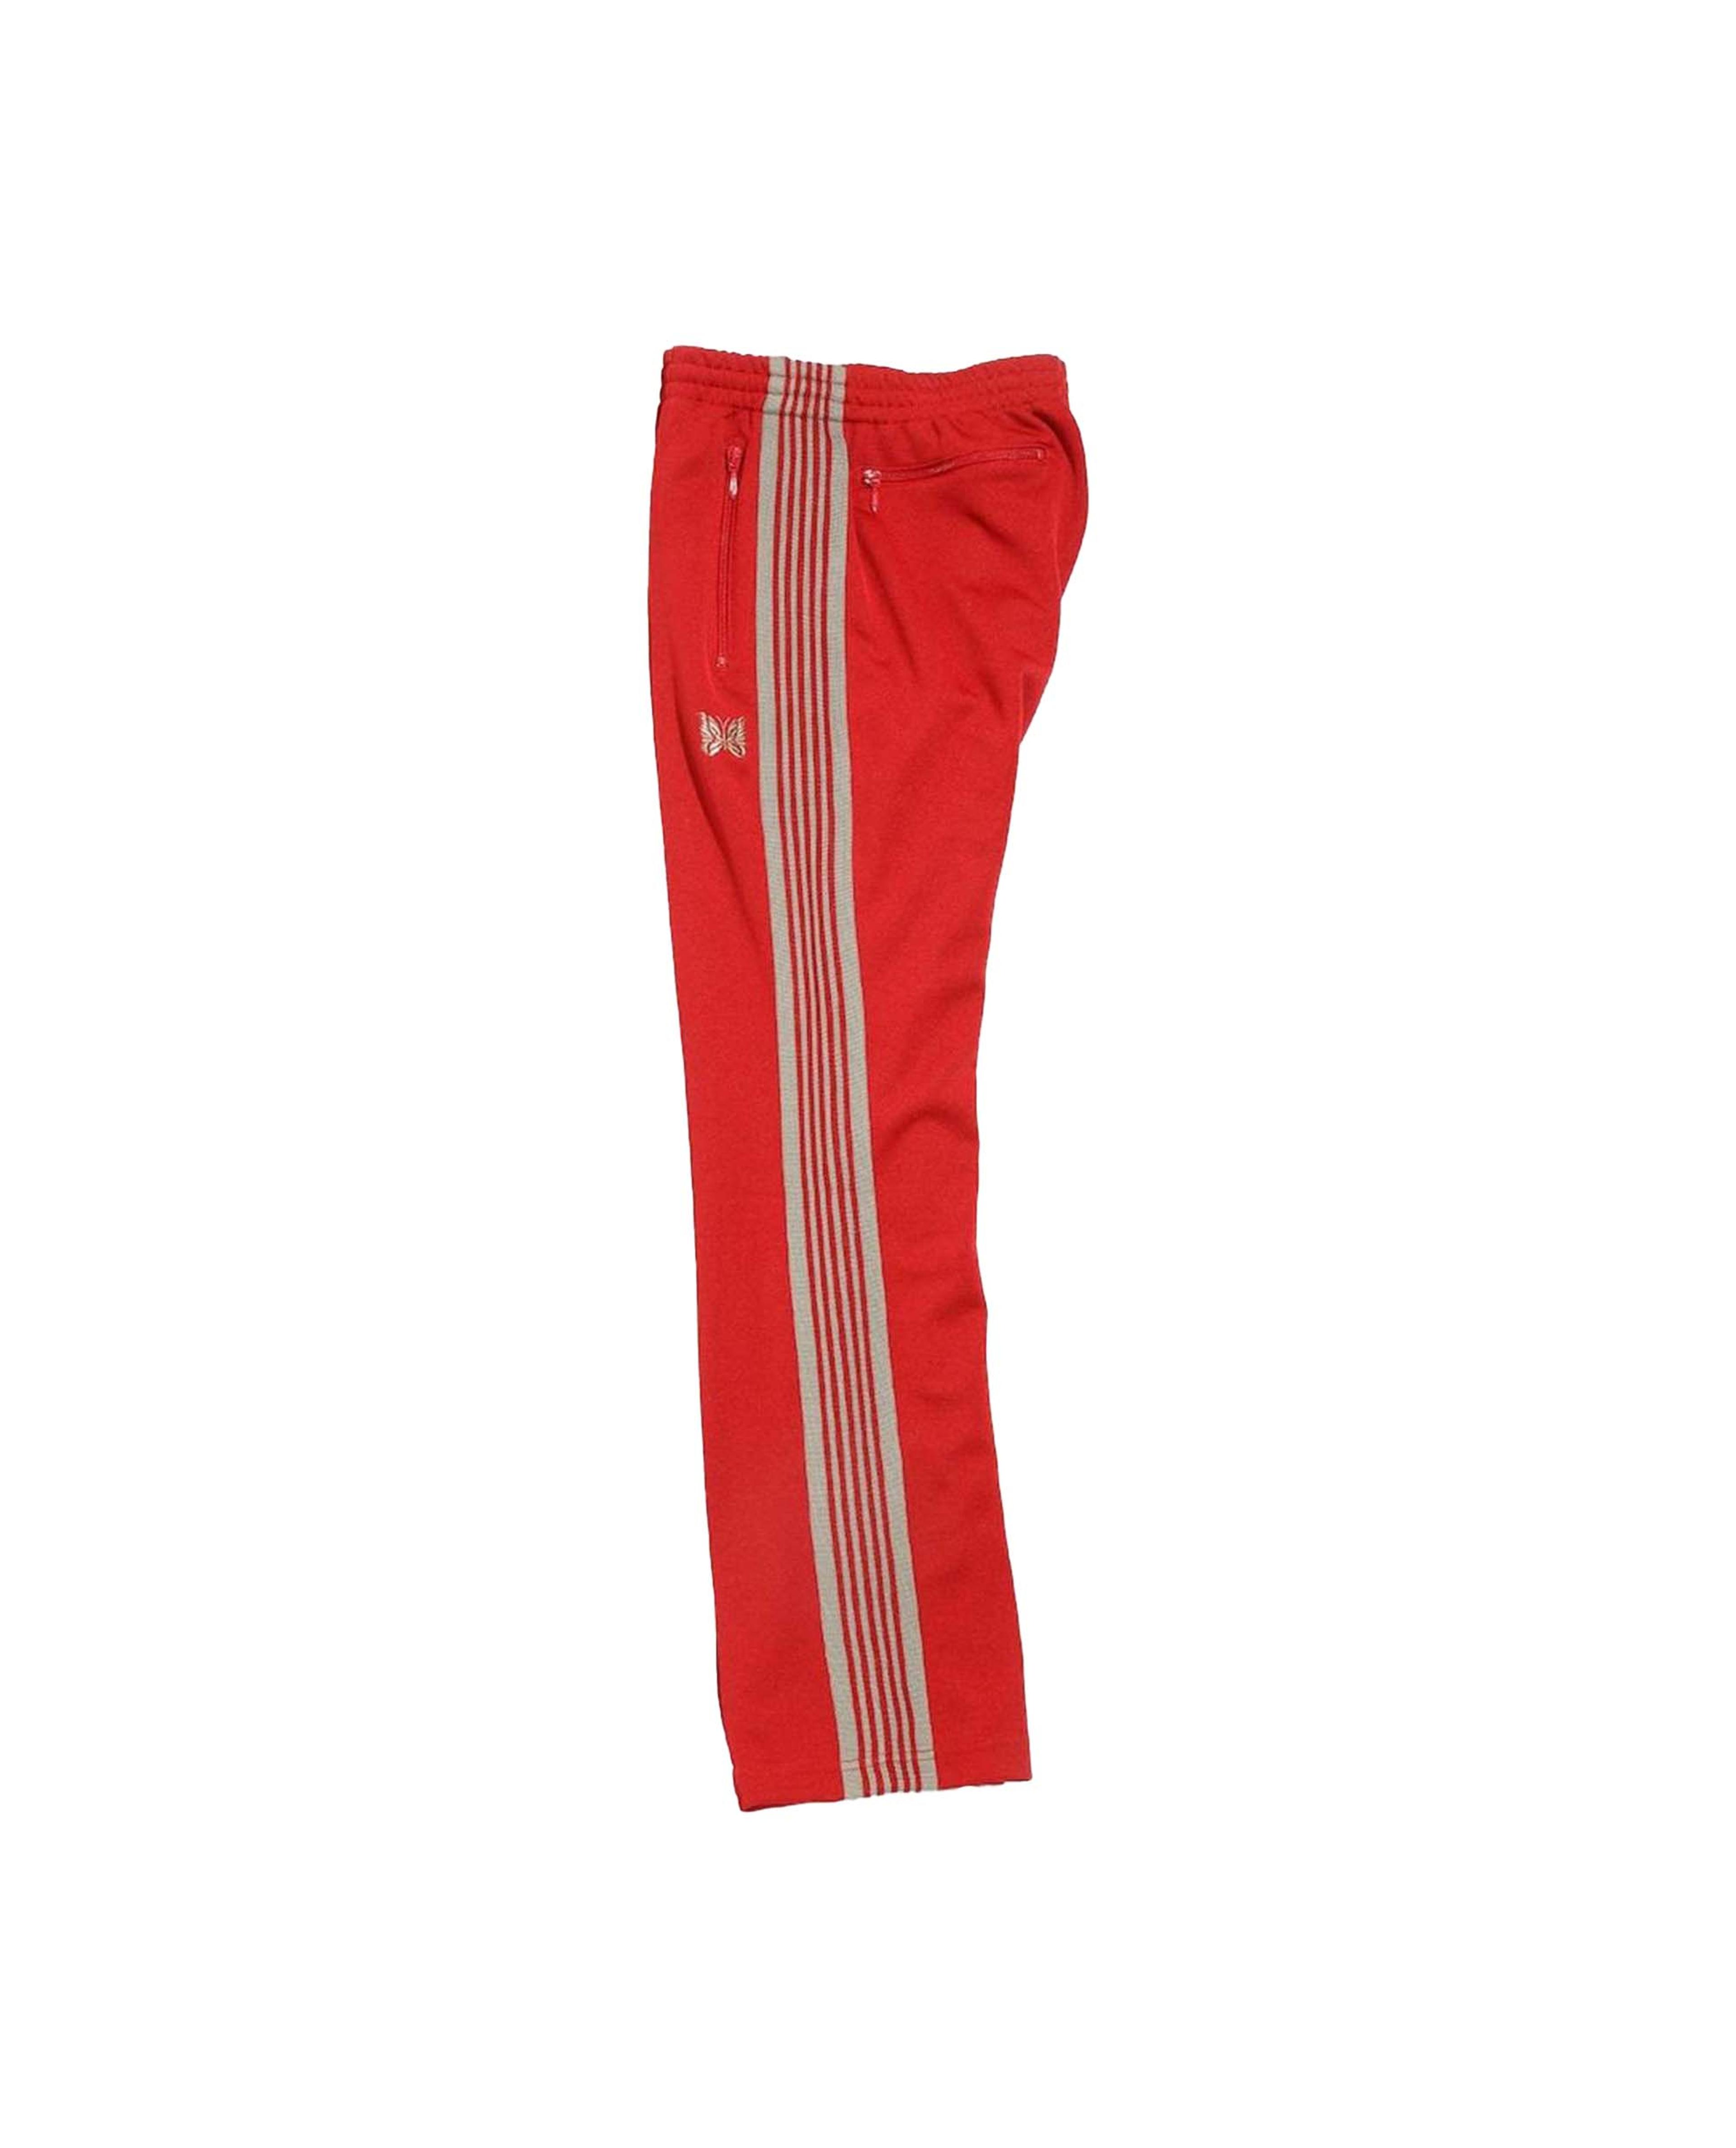 Alternate View 4 of Needles Narrow Track Pants- Poly Smooth